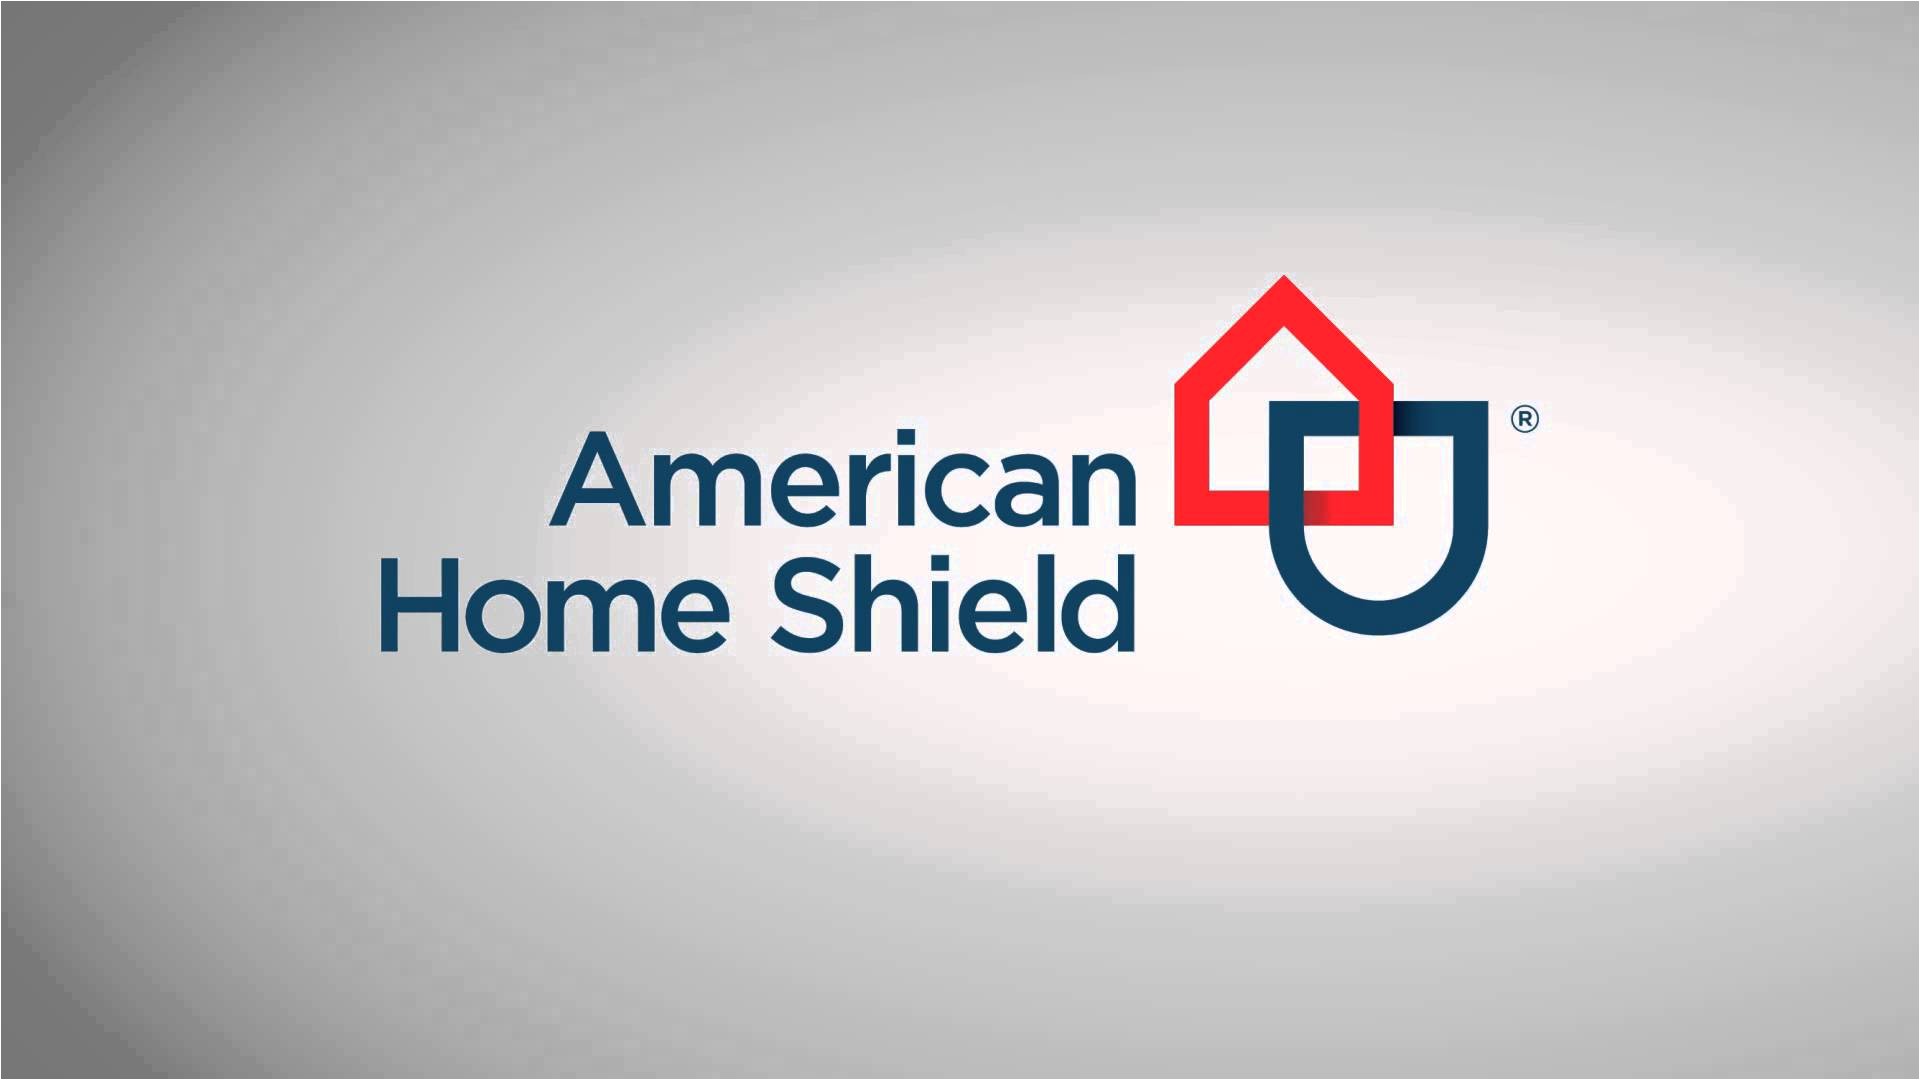 American Home Shield Maintenance Plan Home Appliance Protection and Repair Plans Broken Dryer